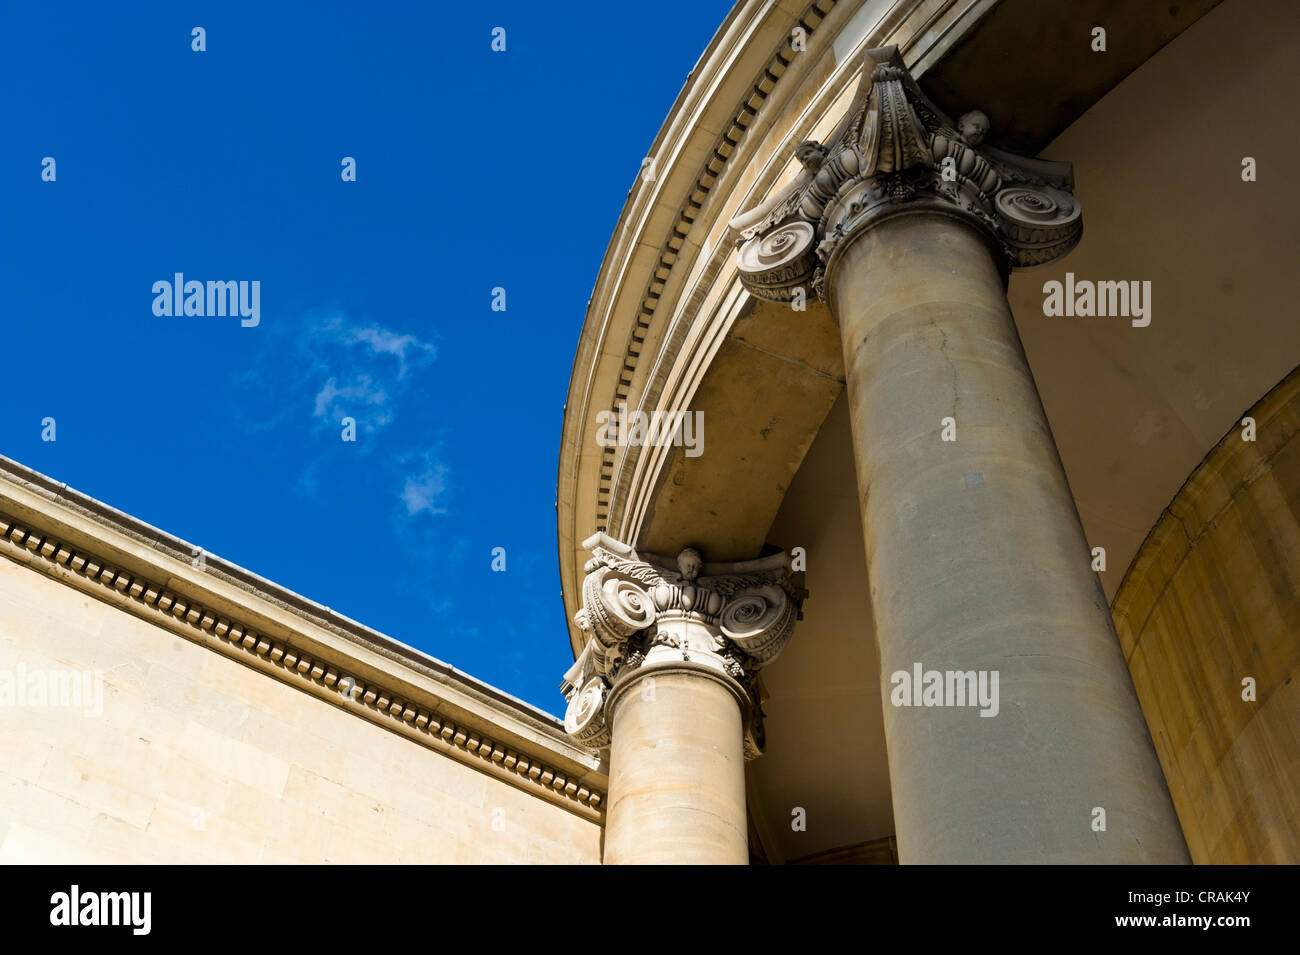 Columns of the neoclassical All Souls Church by John Nash, London, England, United Kingdom, Europe Stock Photo